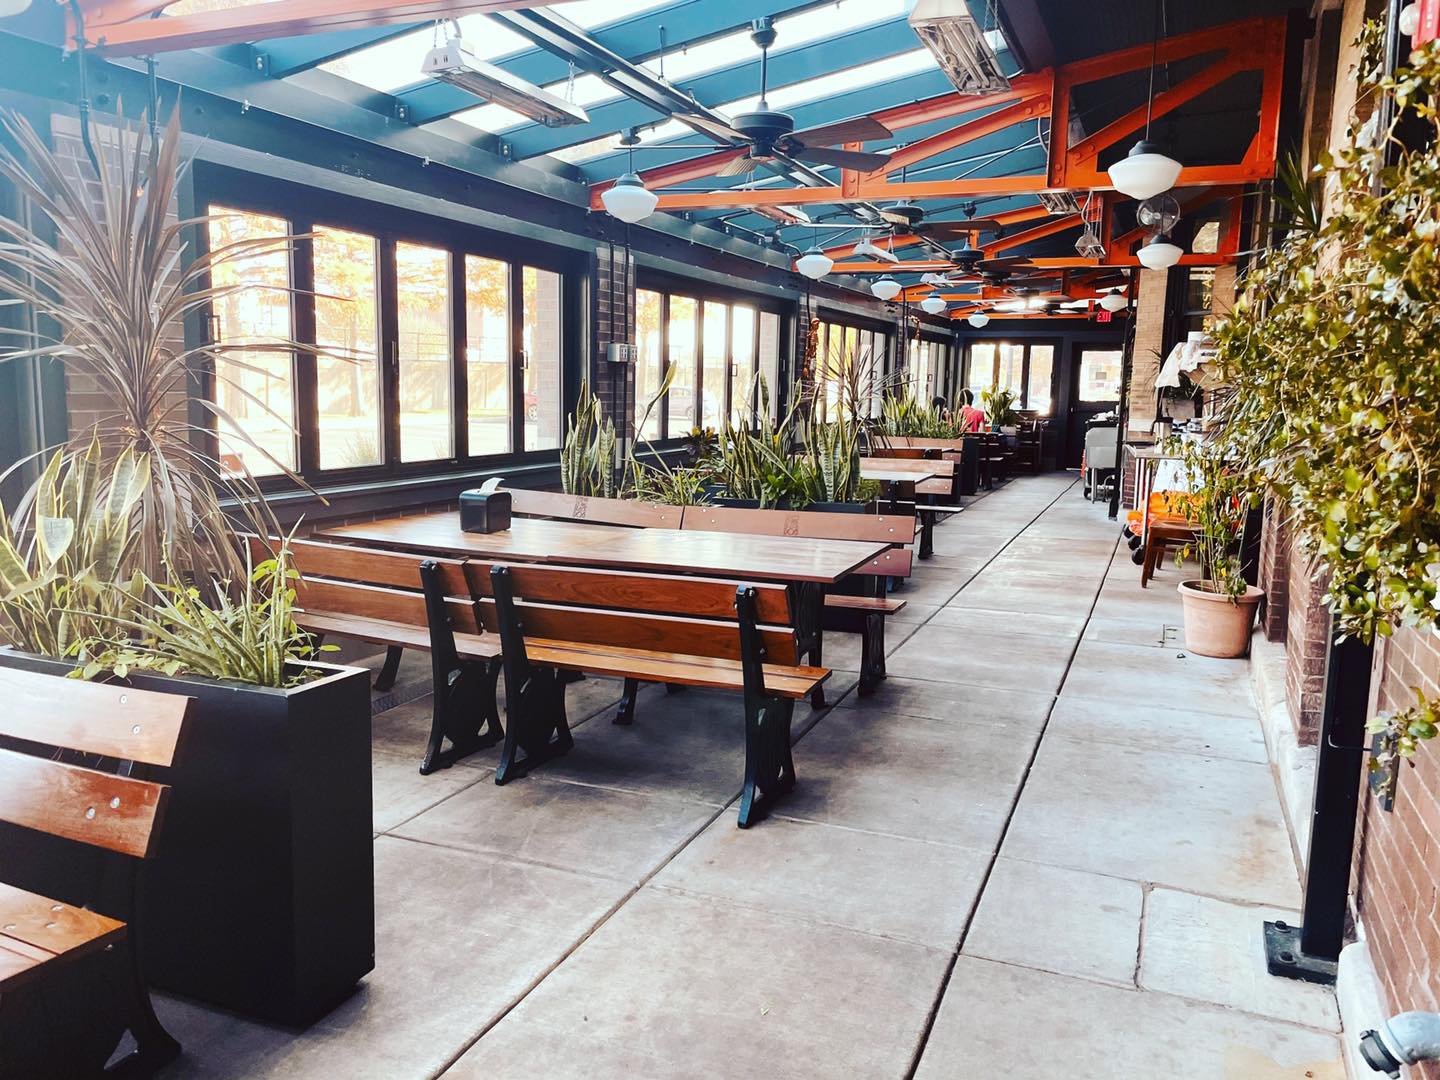 Inside of Black Dog Champaign's four season porch during the daytime, there are several tables with bench seating on a concrete flooring with overhead radiant heating. Photo by Alyssa Buckley.